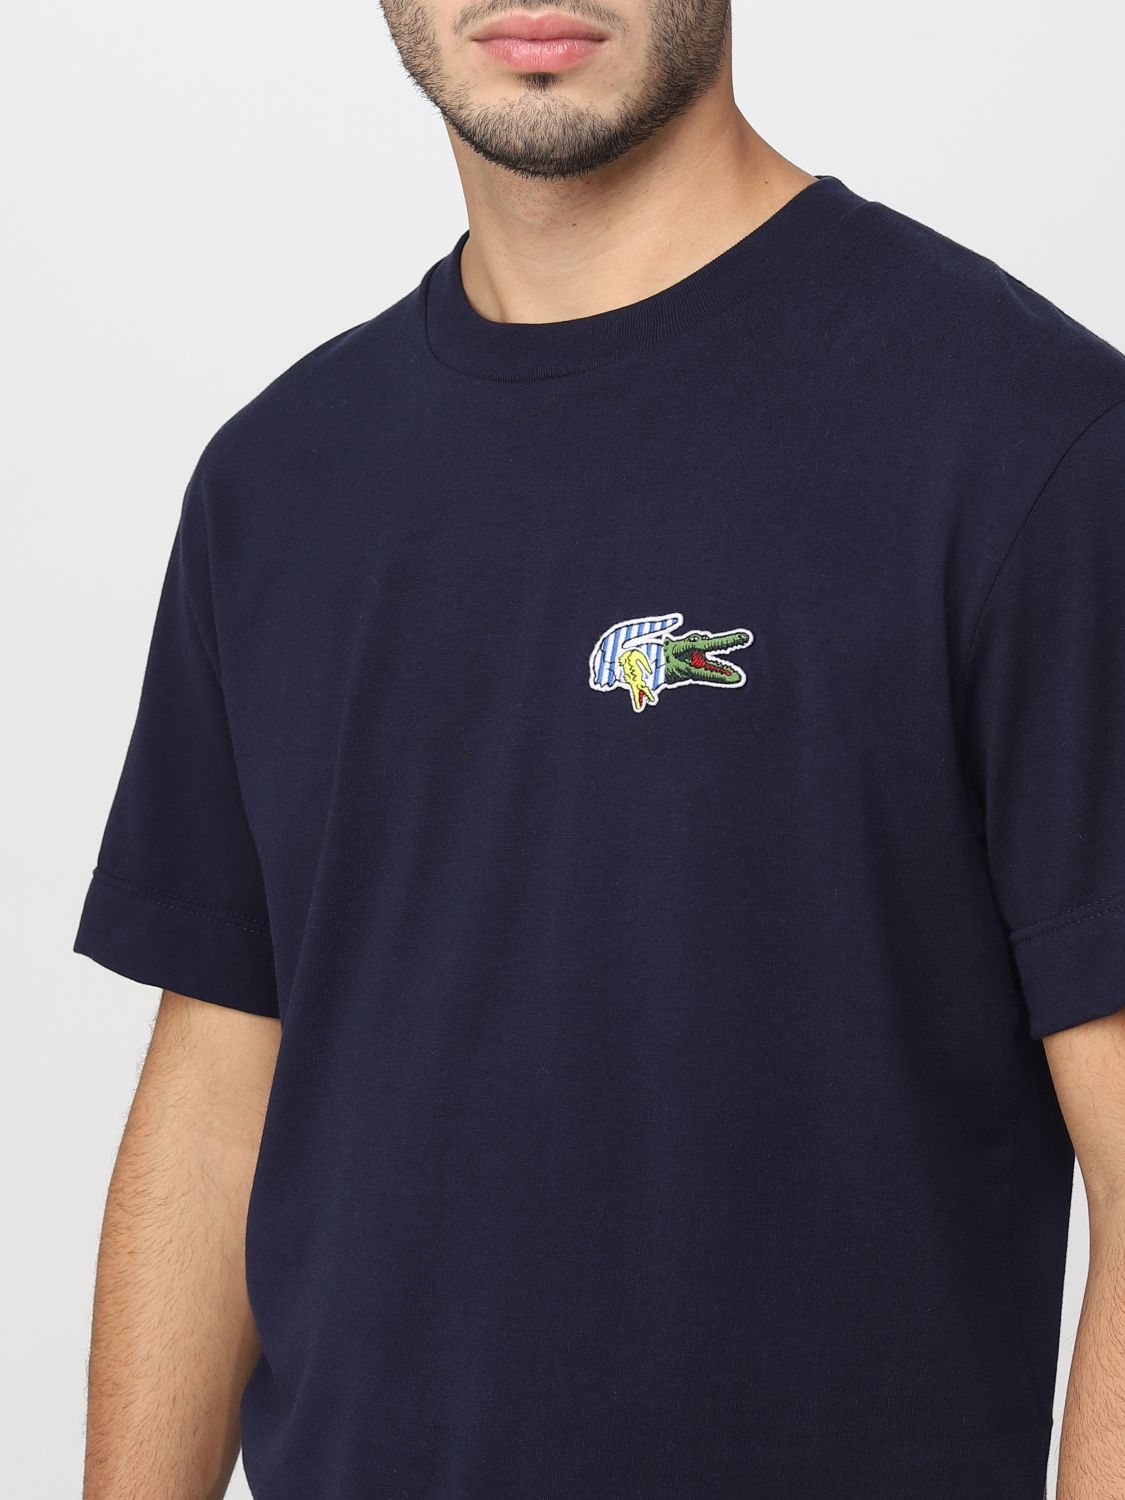 T-shirt Lacoste: Lacoste t-shirt for man navy 3